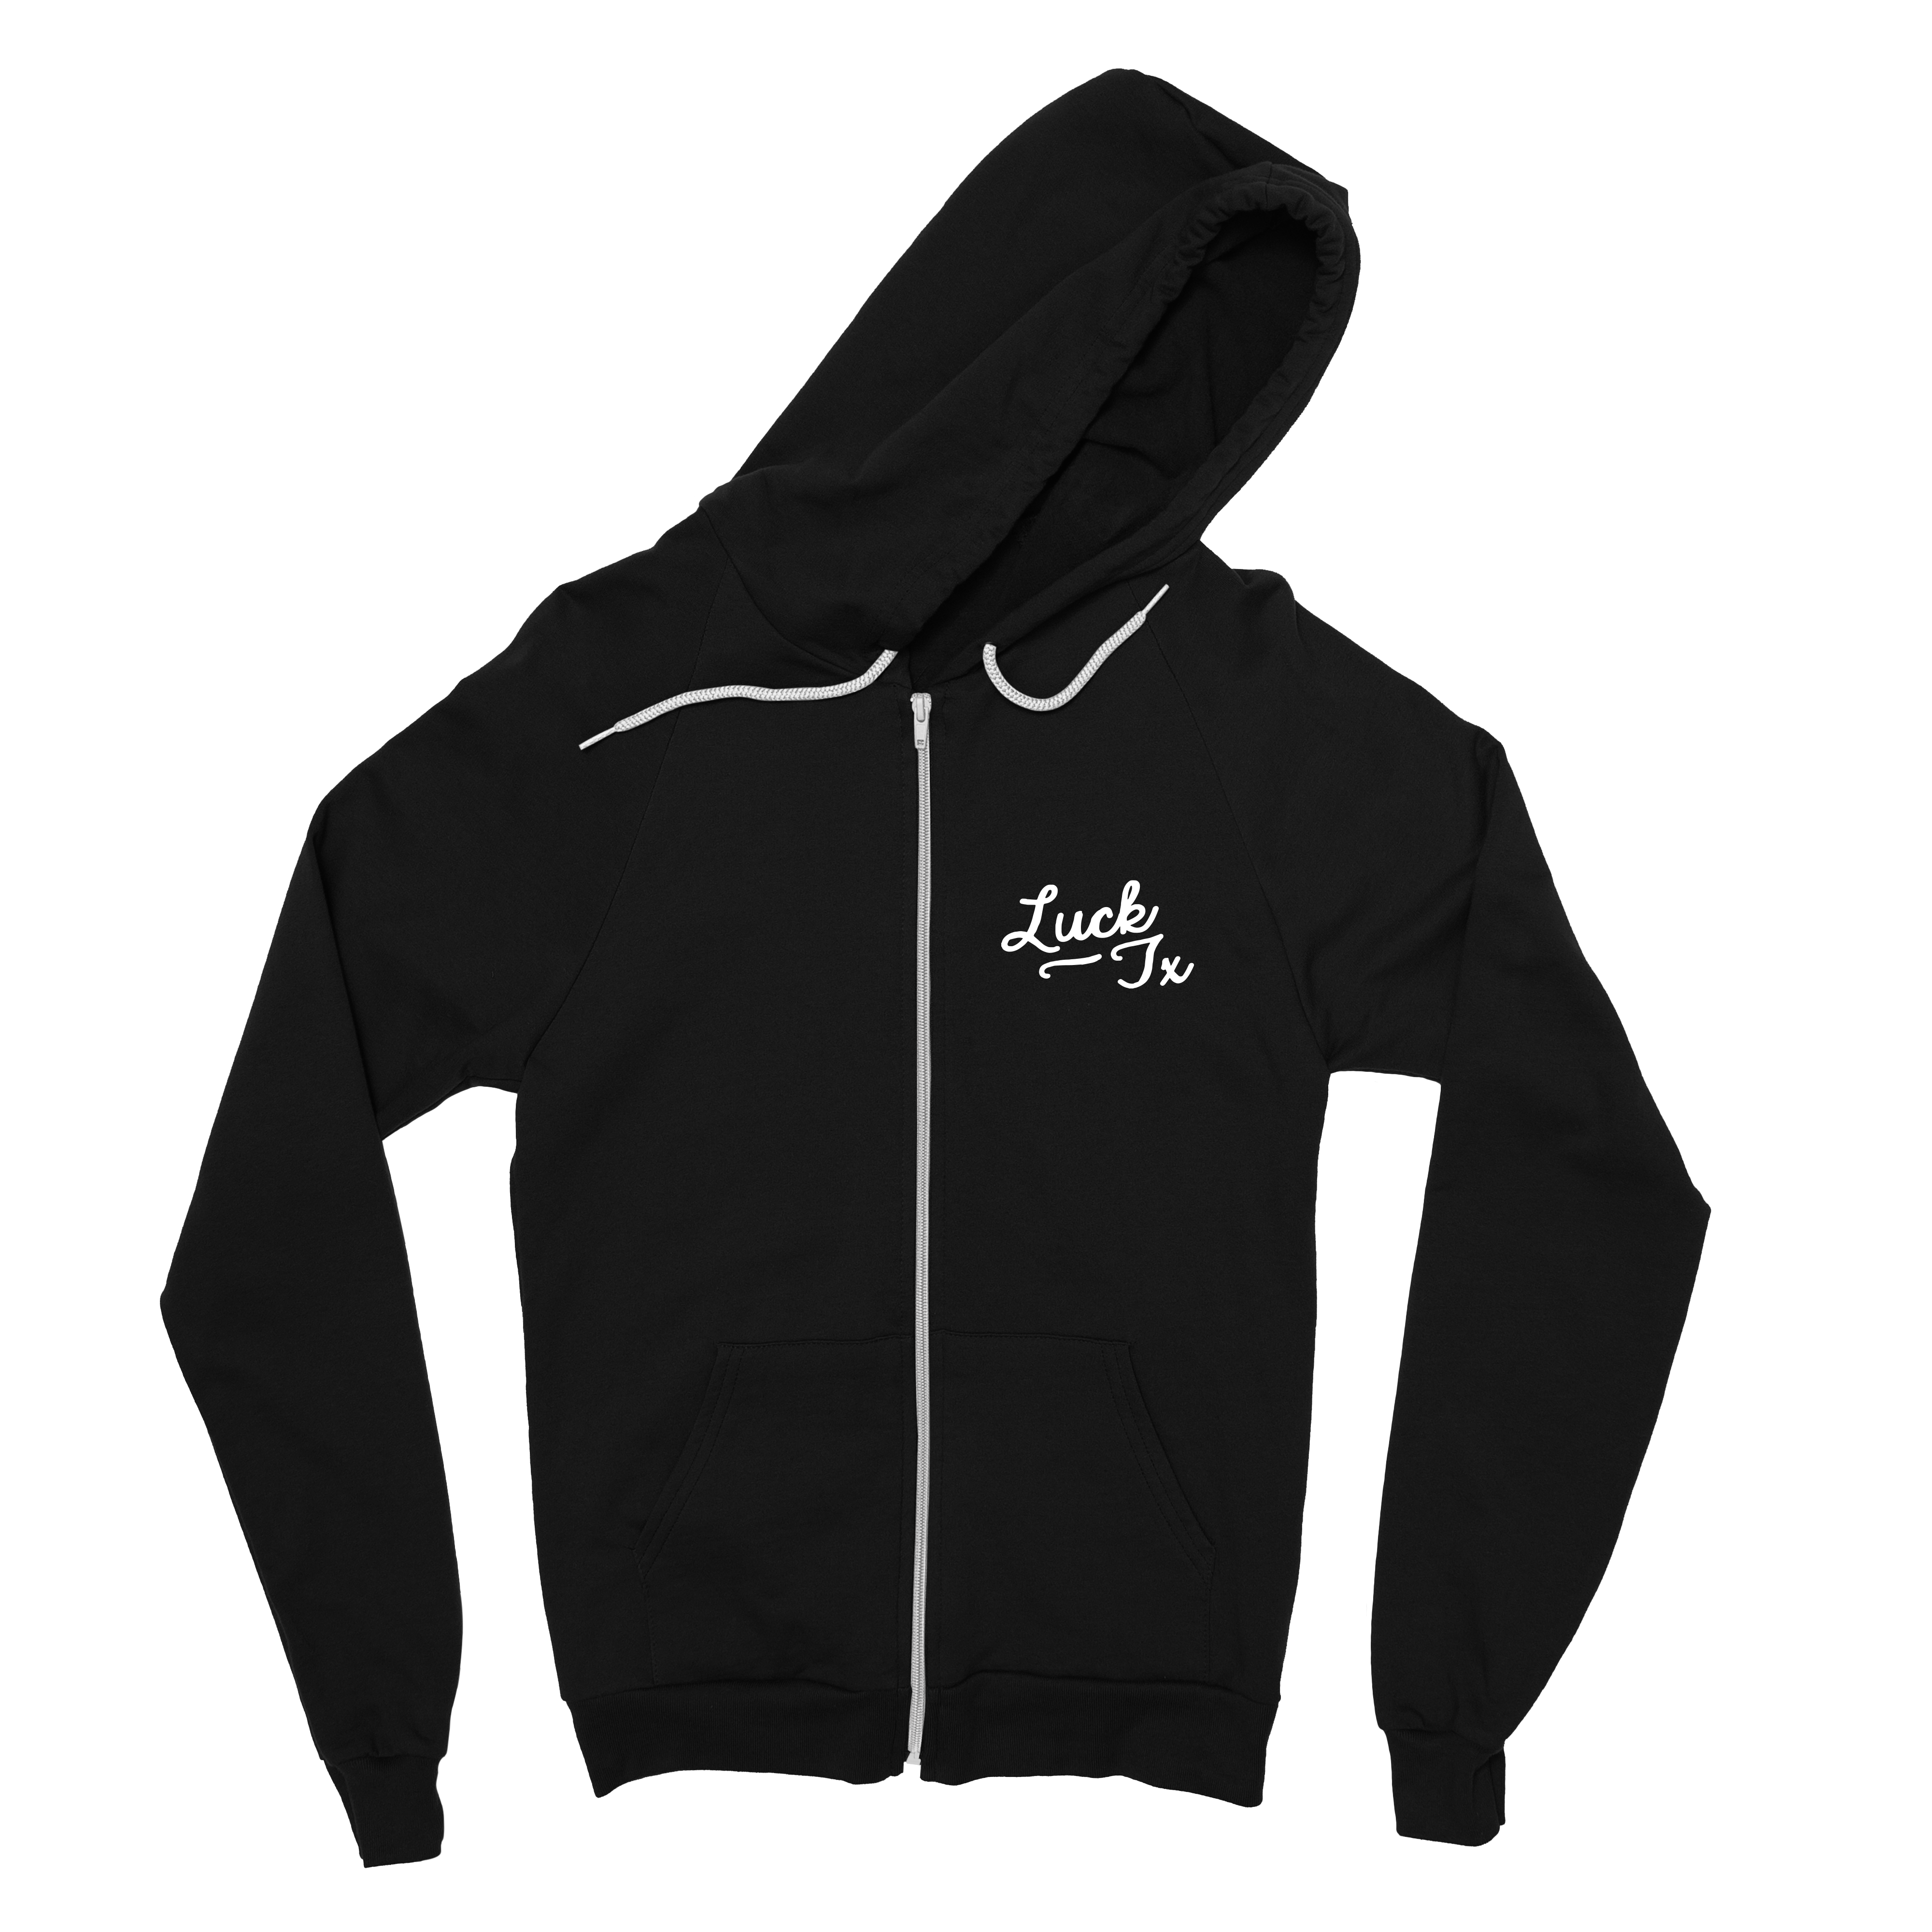 Luck Reunion | 10 Years of Luck Hoodie